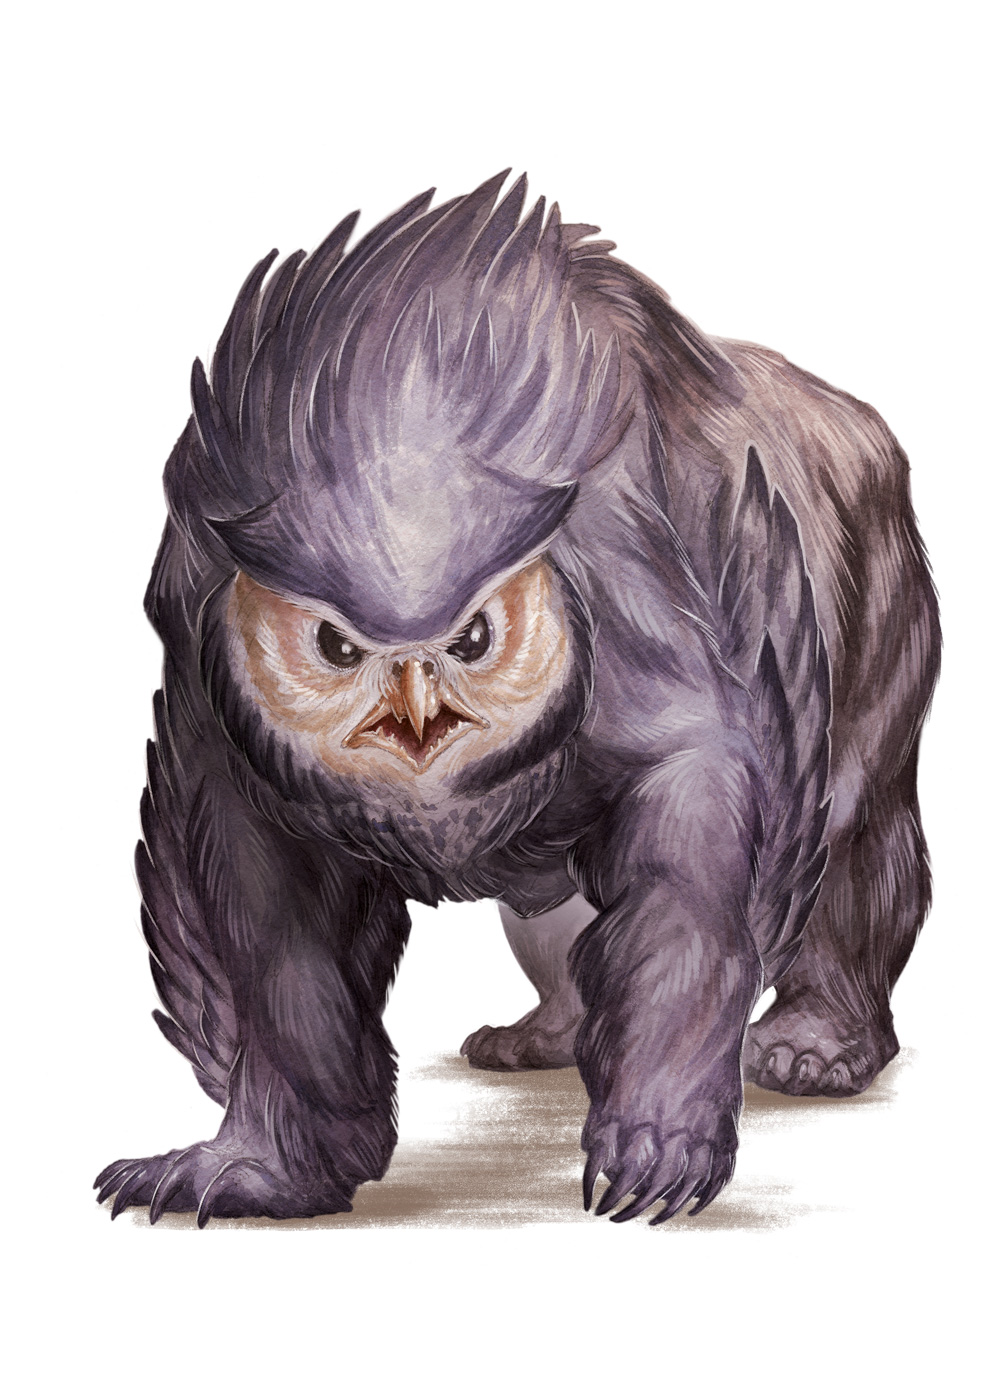 A creature with a unique blend of bear and owl features is shown in a stance that suggests readiness for action. It possesses a bear's hefty, powerful body, covered in thick, purple-tinged fur. The head is that of an owl, with a sharp beak and intense, forward-facing eyes, and the feathered tufts characteristic of an owl's ears rise prominently from the top of its head. Its forelimbs are muscular with large claws, poised as though it's about to pounce or defend itself. The expression on the creature's face is one of focused determination, and its overall posture conveys both strength and a primal nobility.